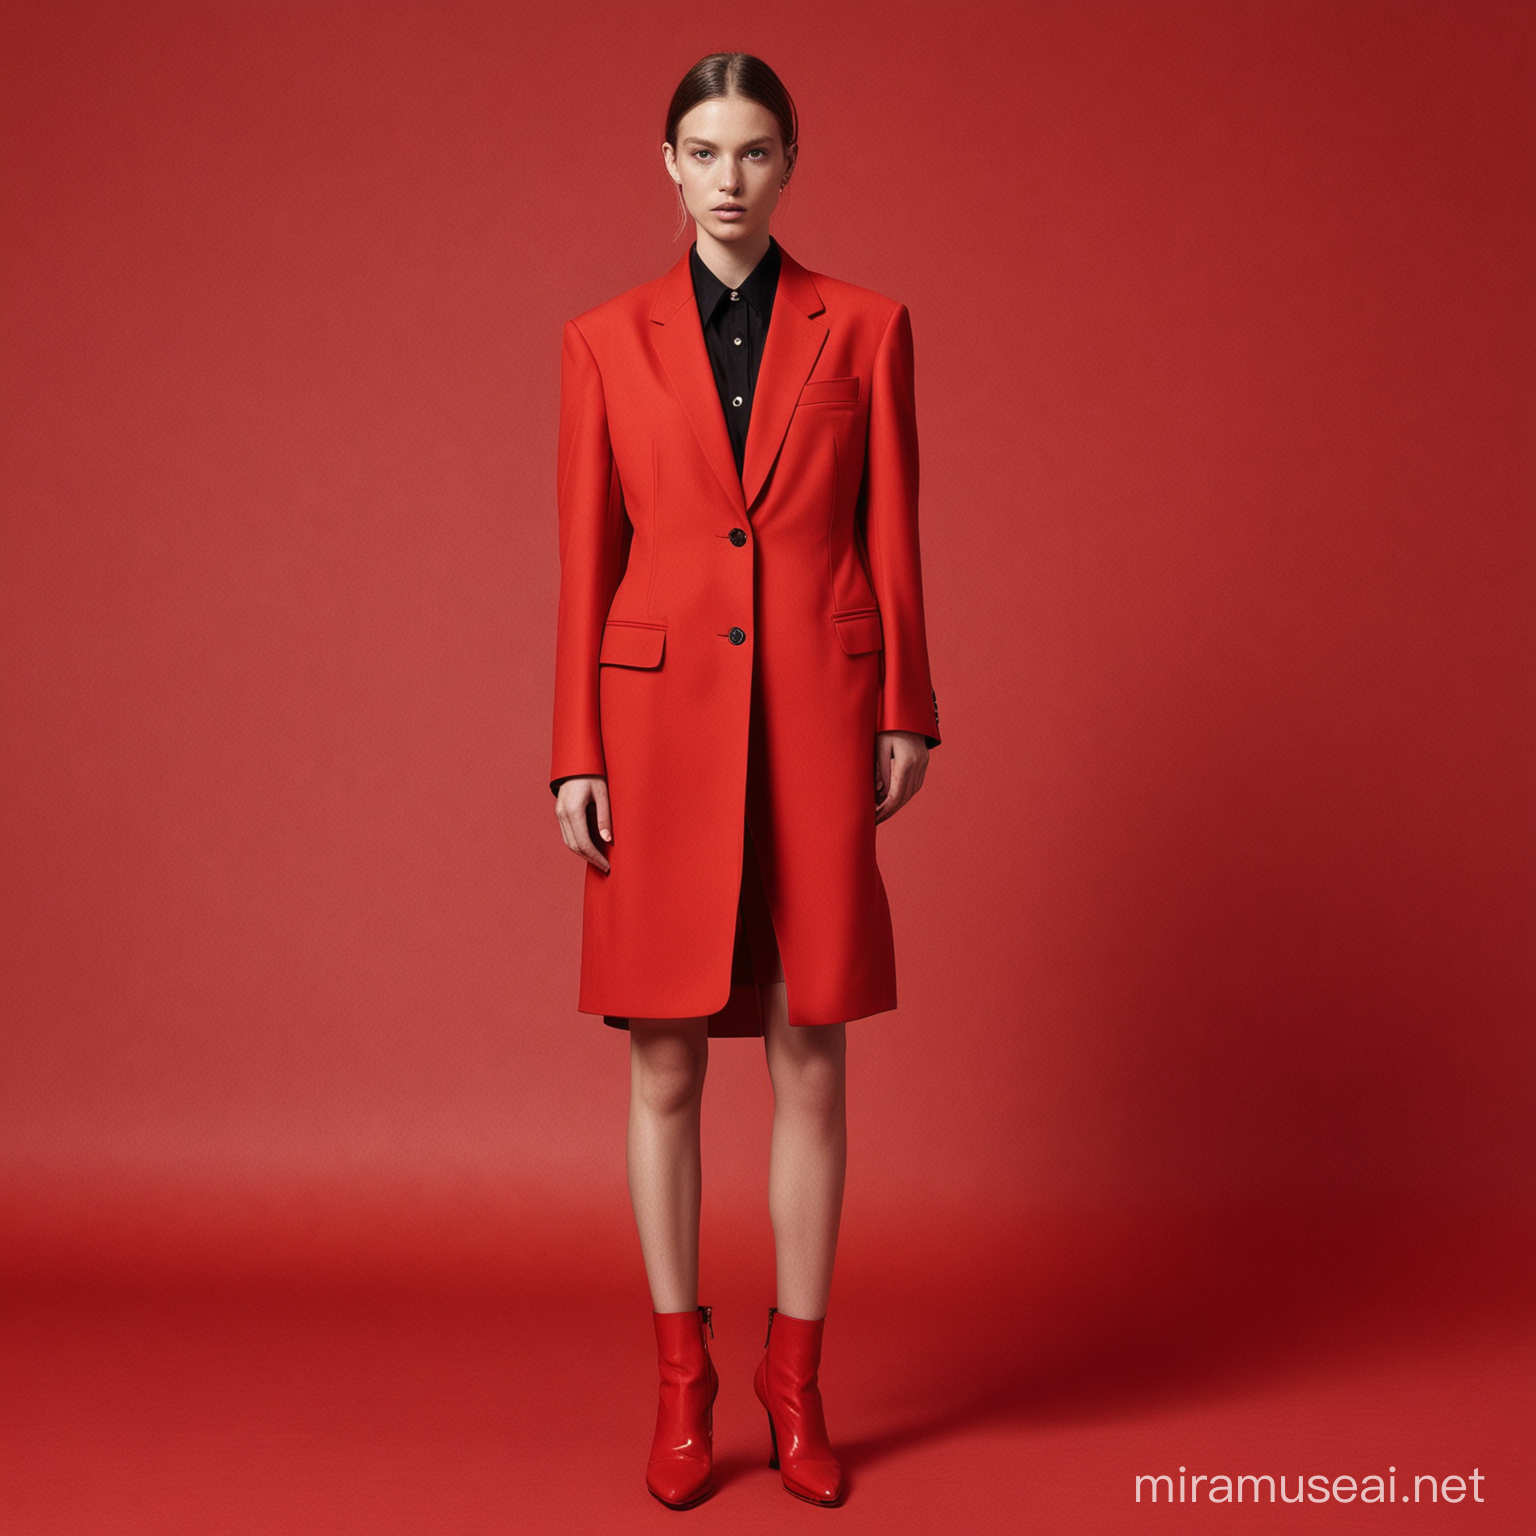 Minimalist and Refined Balenciaga Campaign with Red Background and Clothing